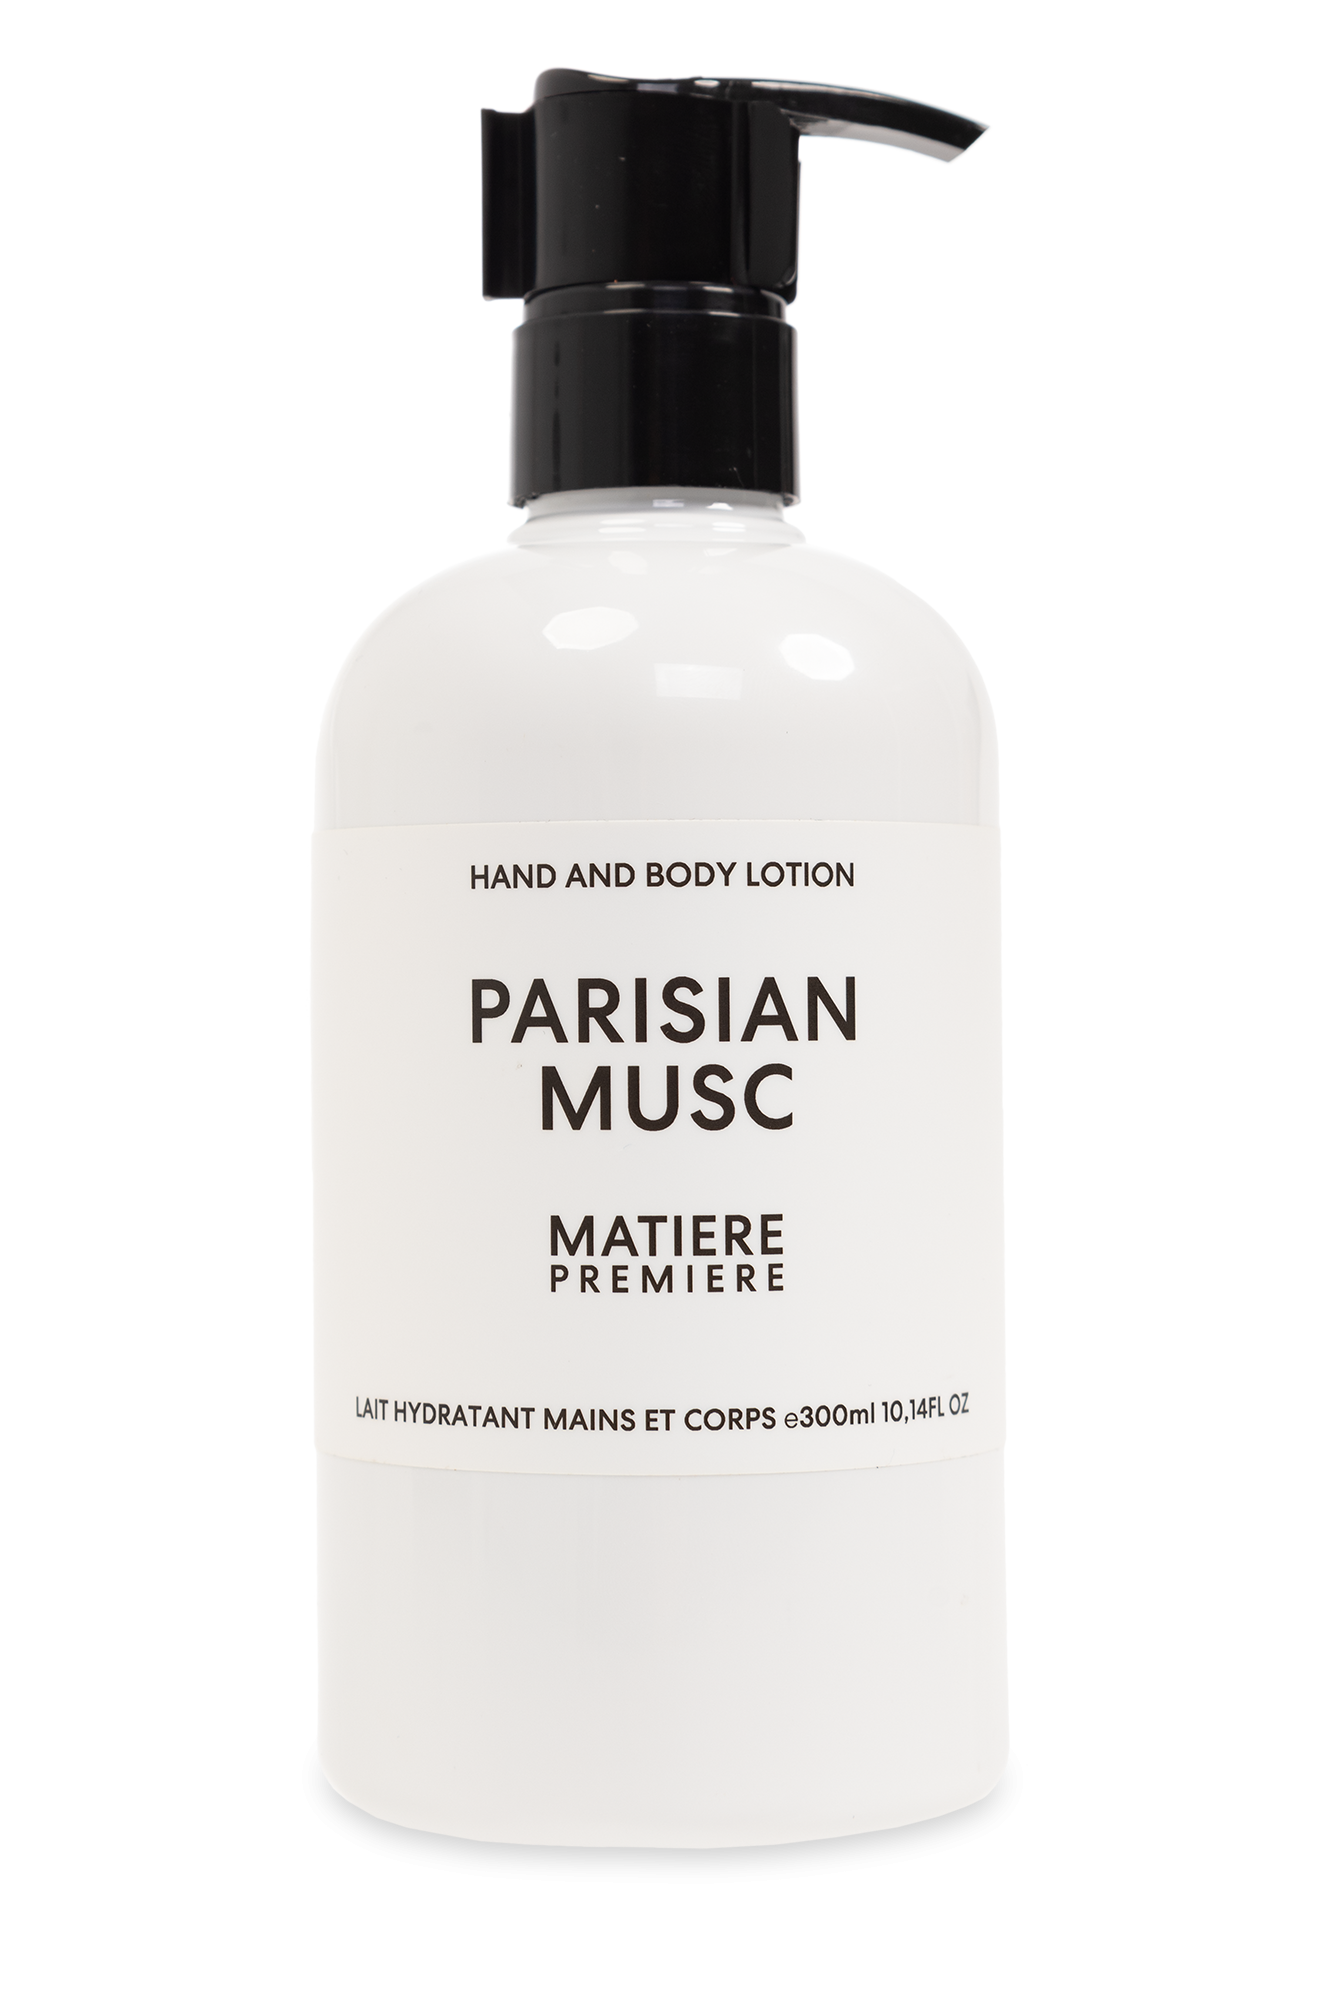 Matiere Premiere ‘Parisian Musc’ body and hand lotion